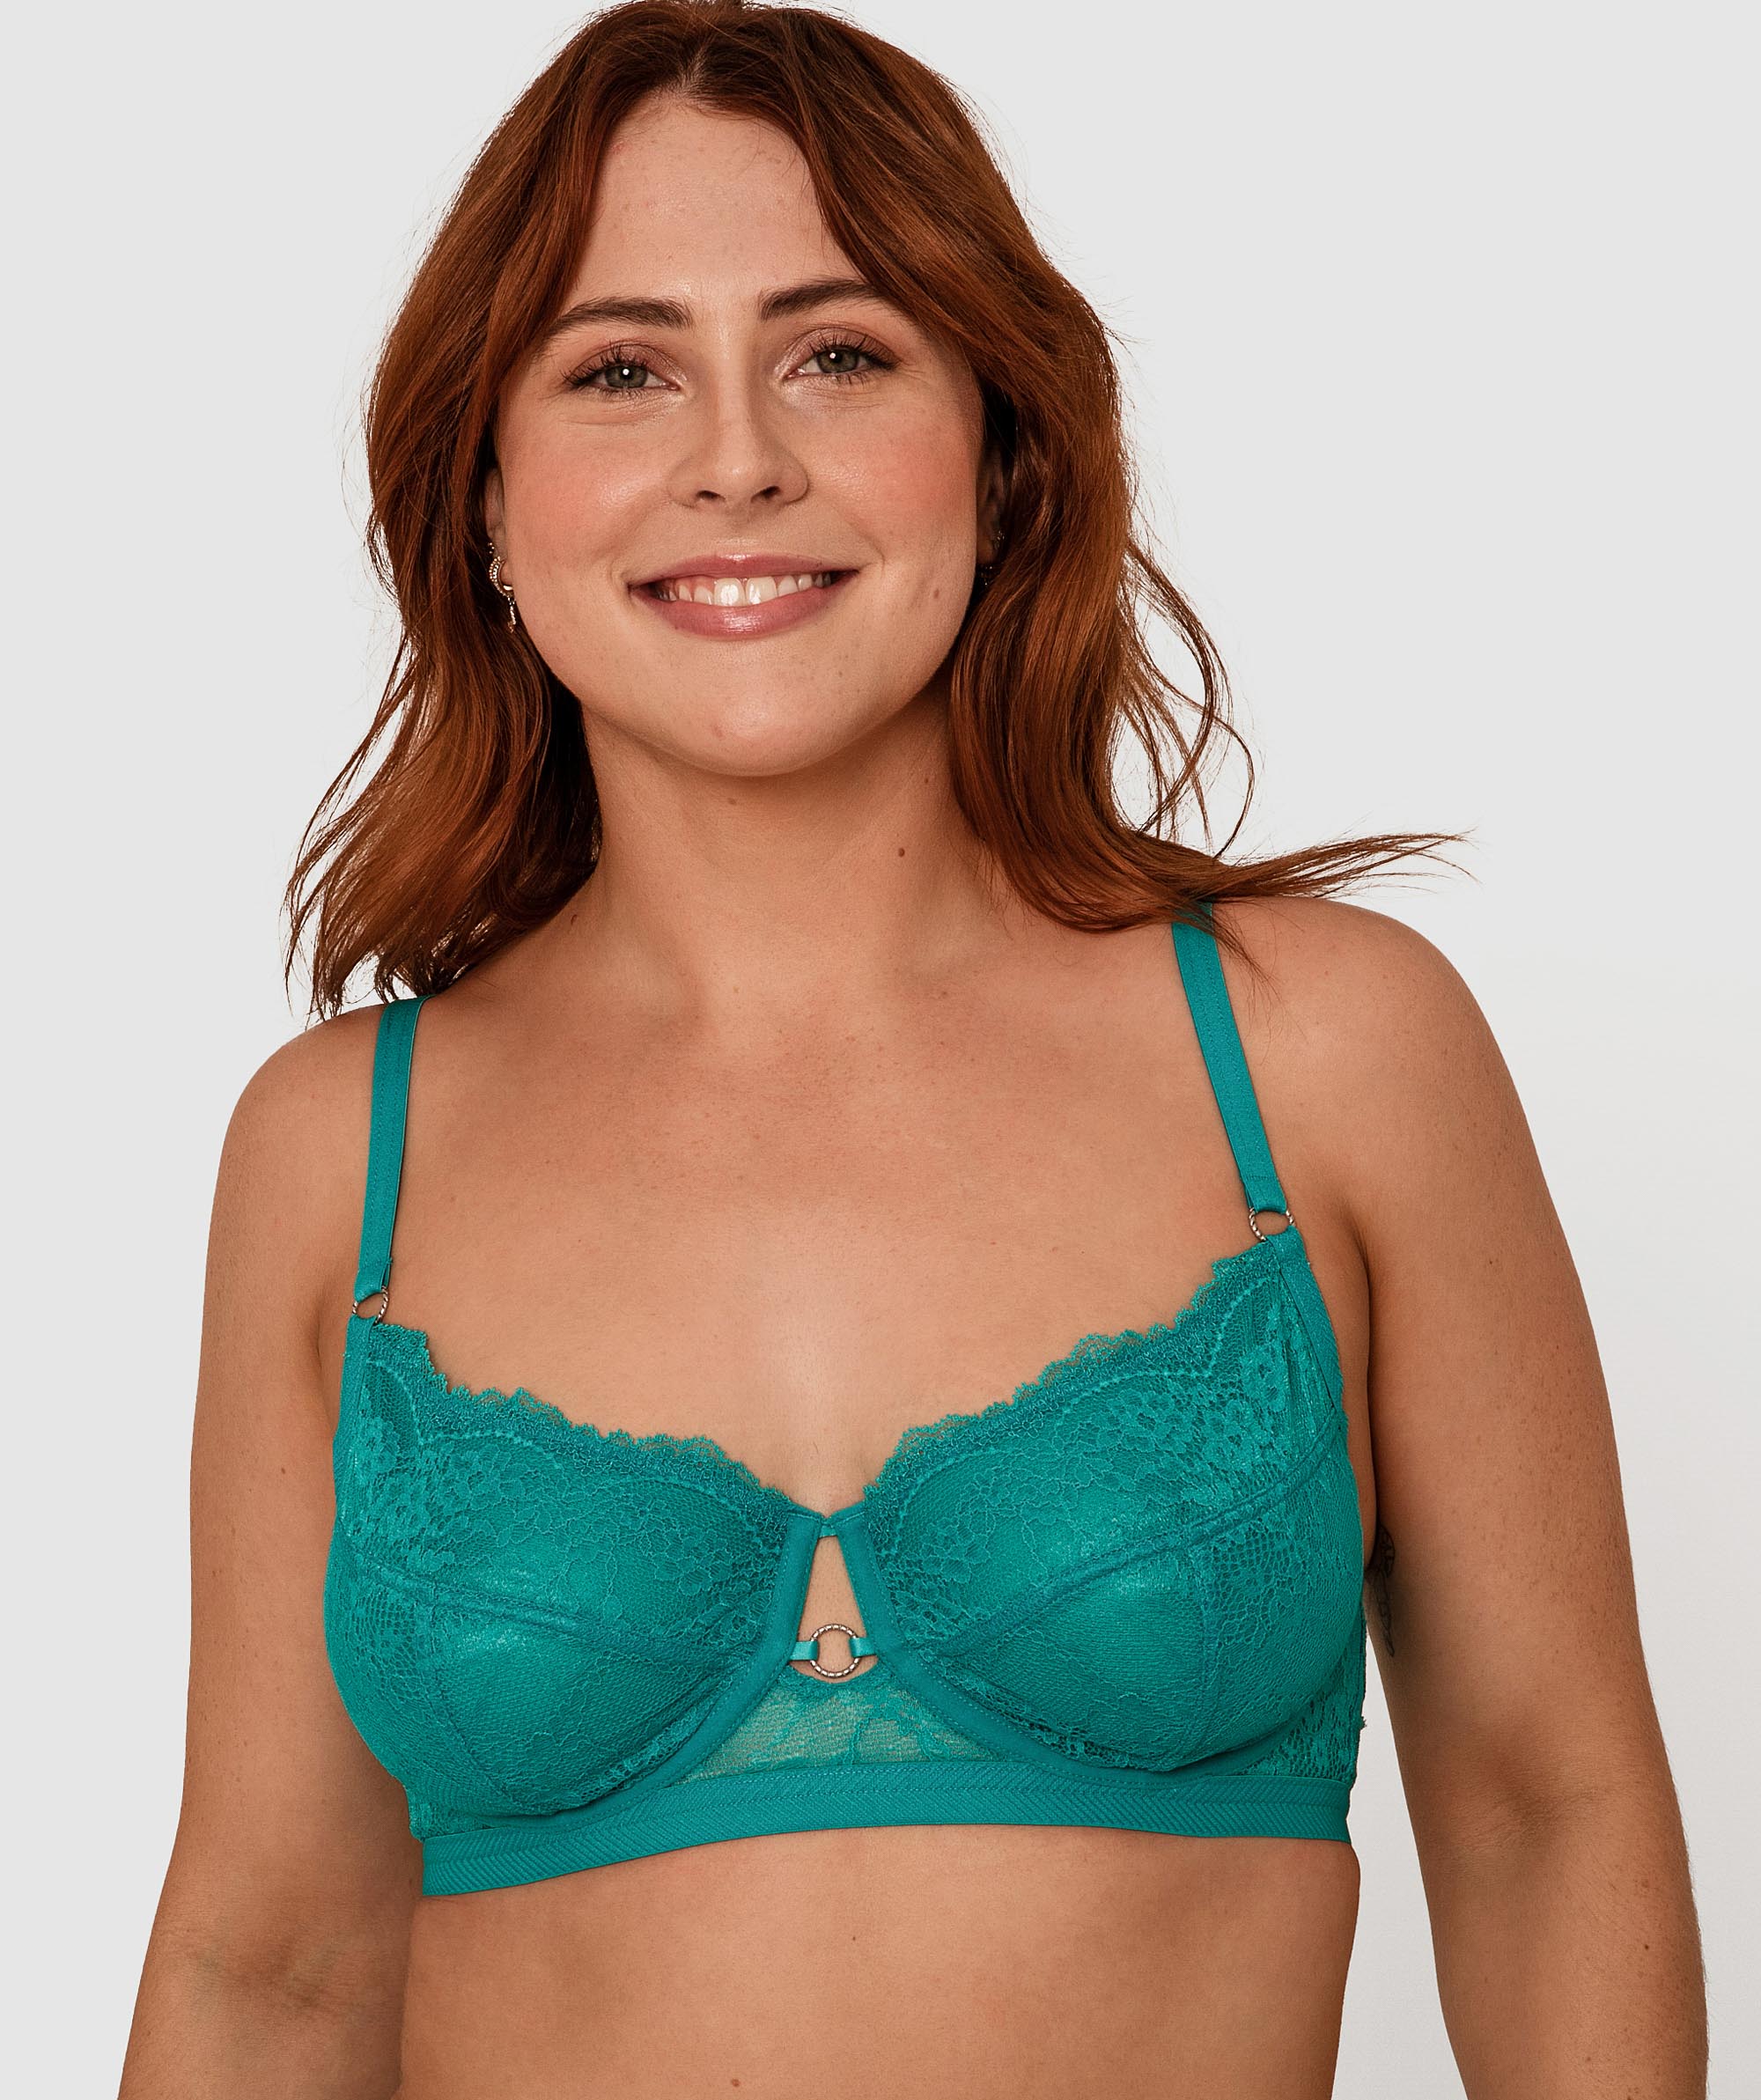 Millie Full Cup Underwire Bra - Teal